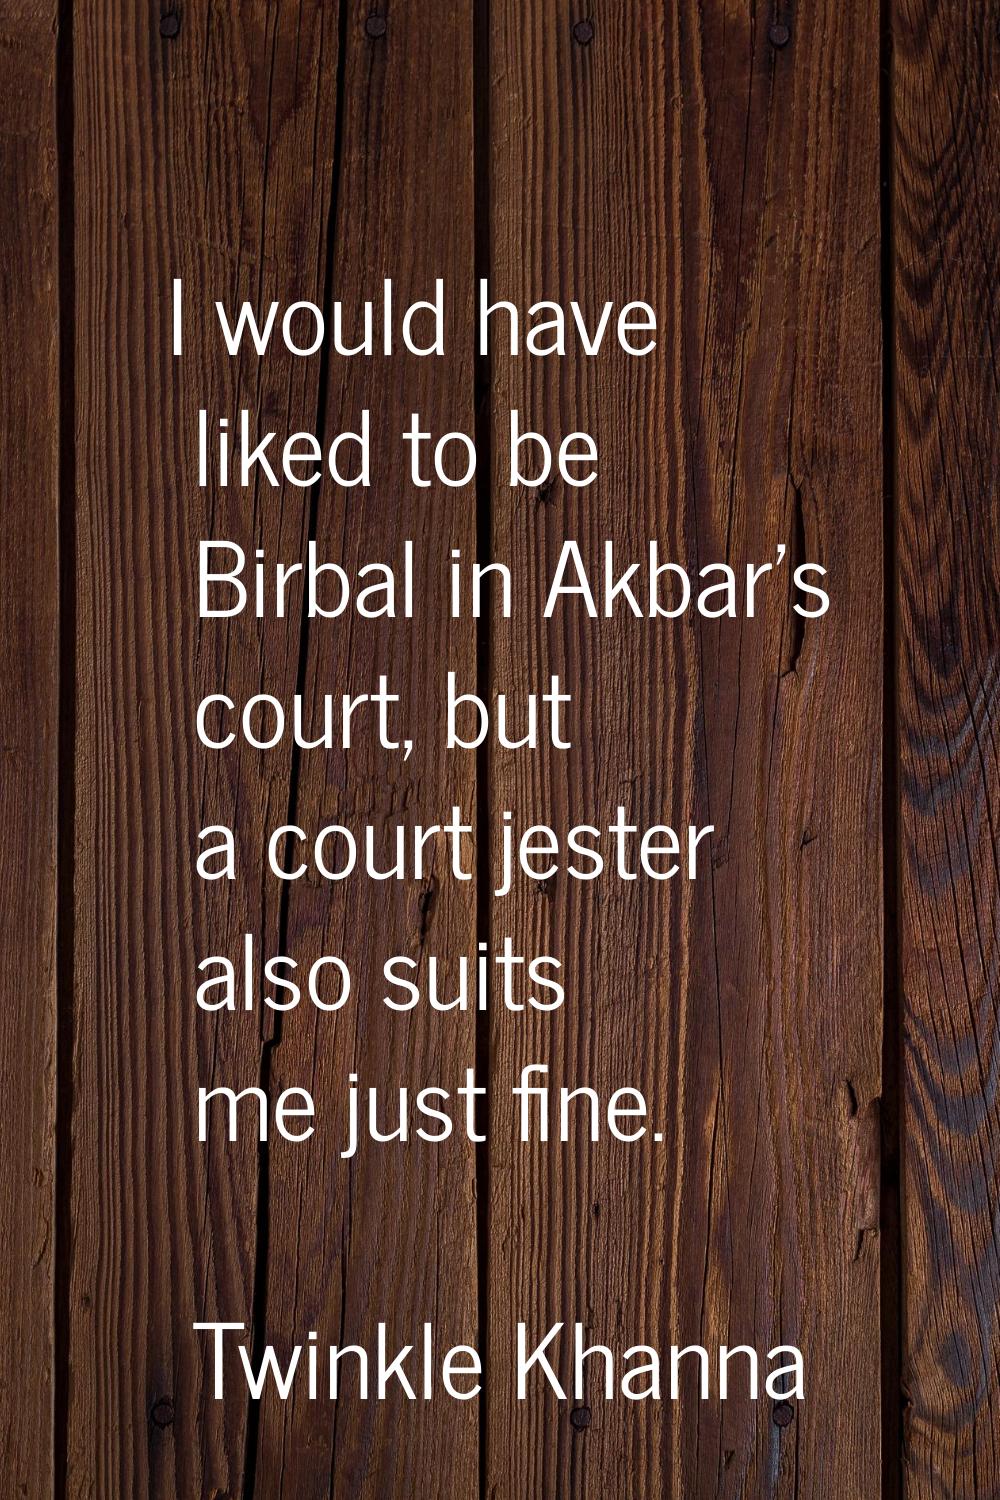 I would have liked to be Birbal in Akbar's court, but a court jester also suits me just fine.